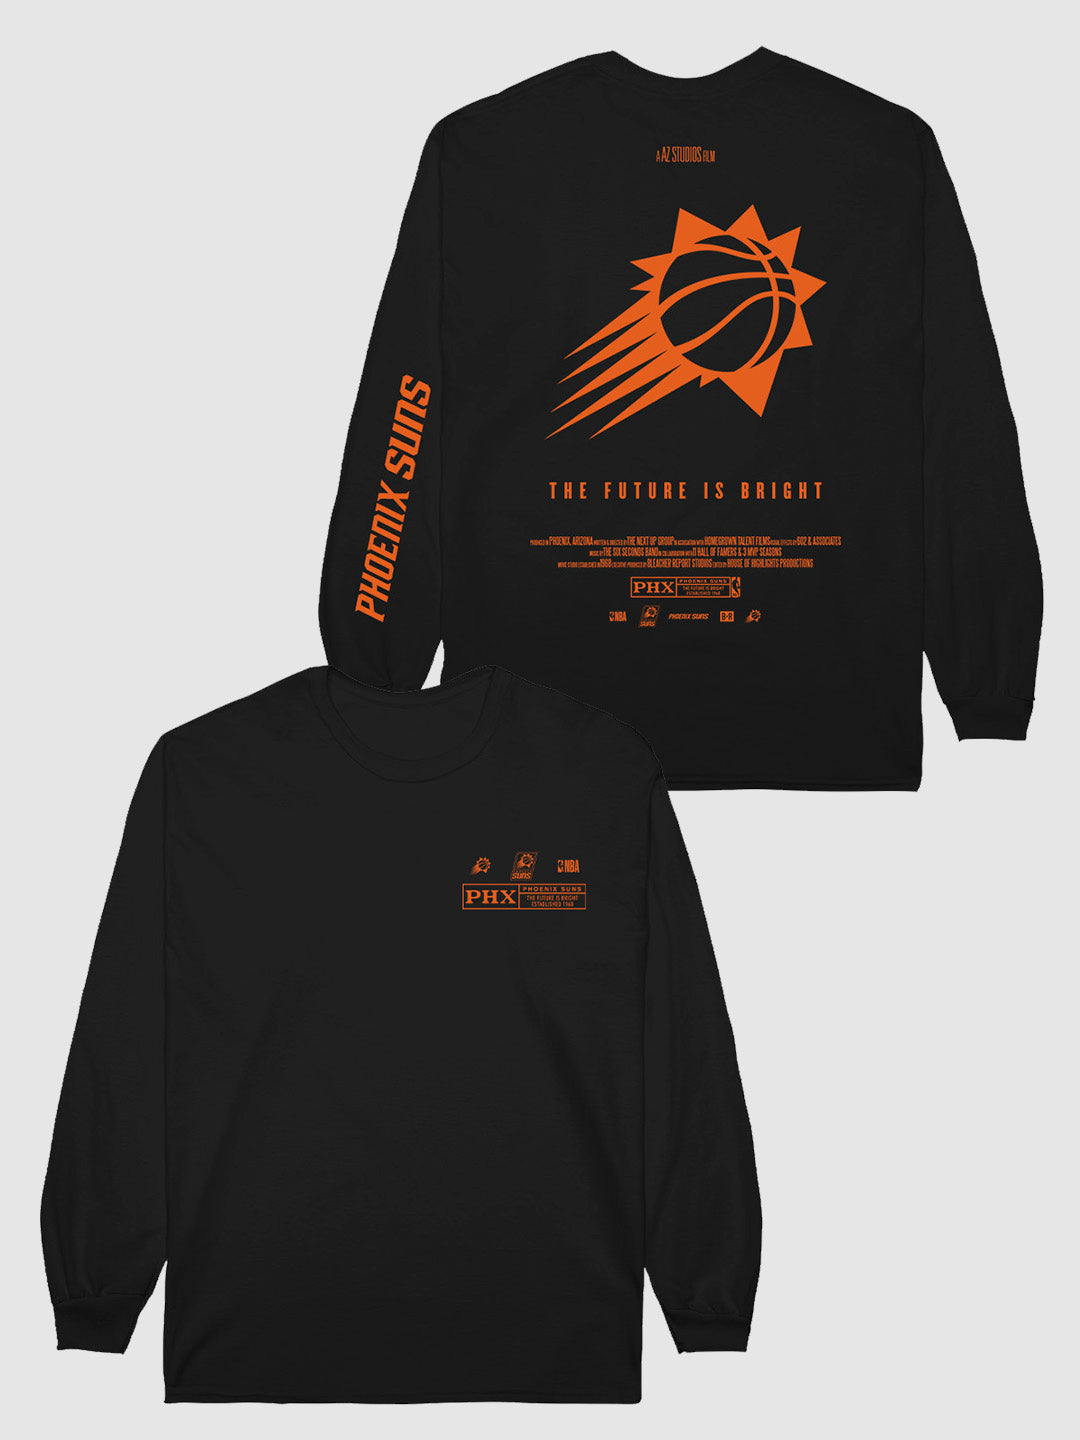 The Suns Check The Credits Long Sleeve T-Shirt